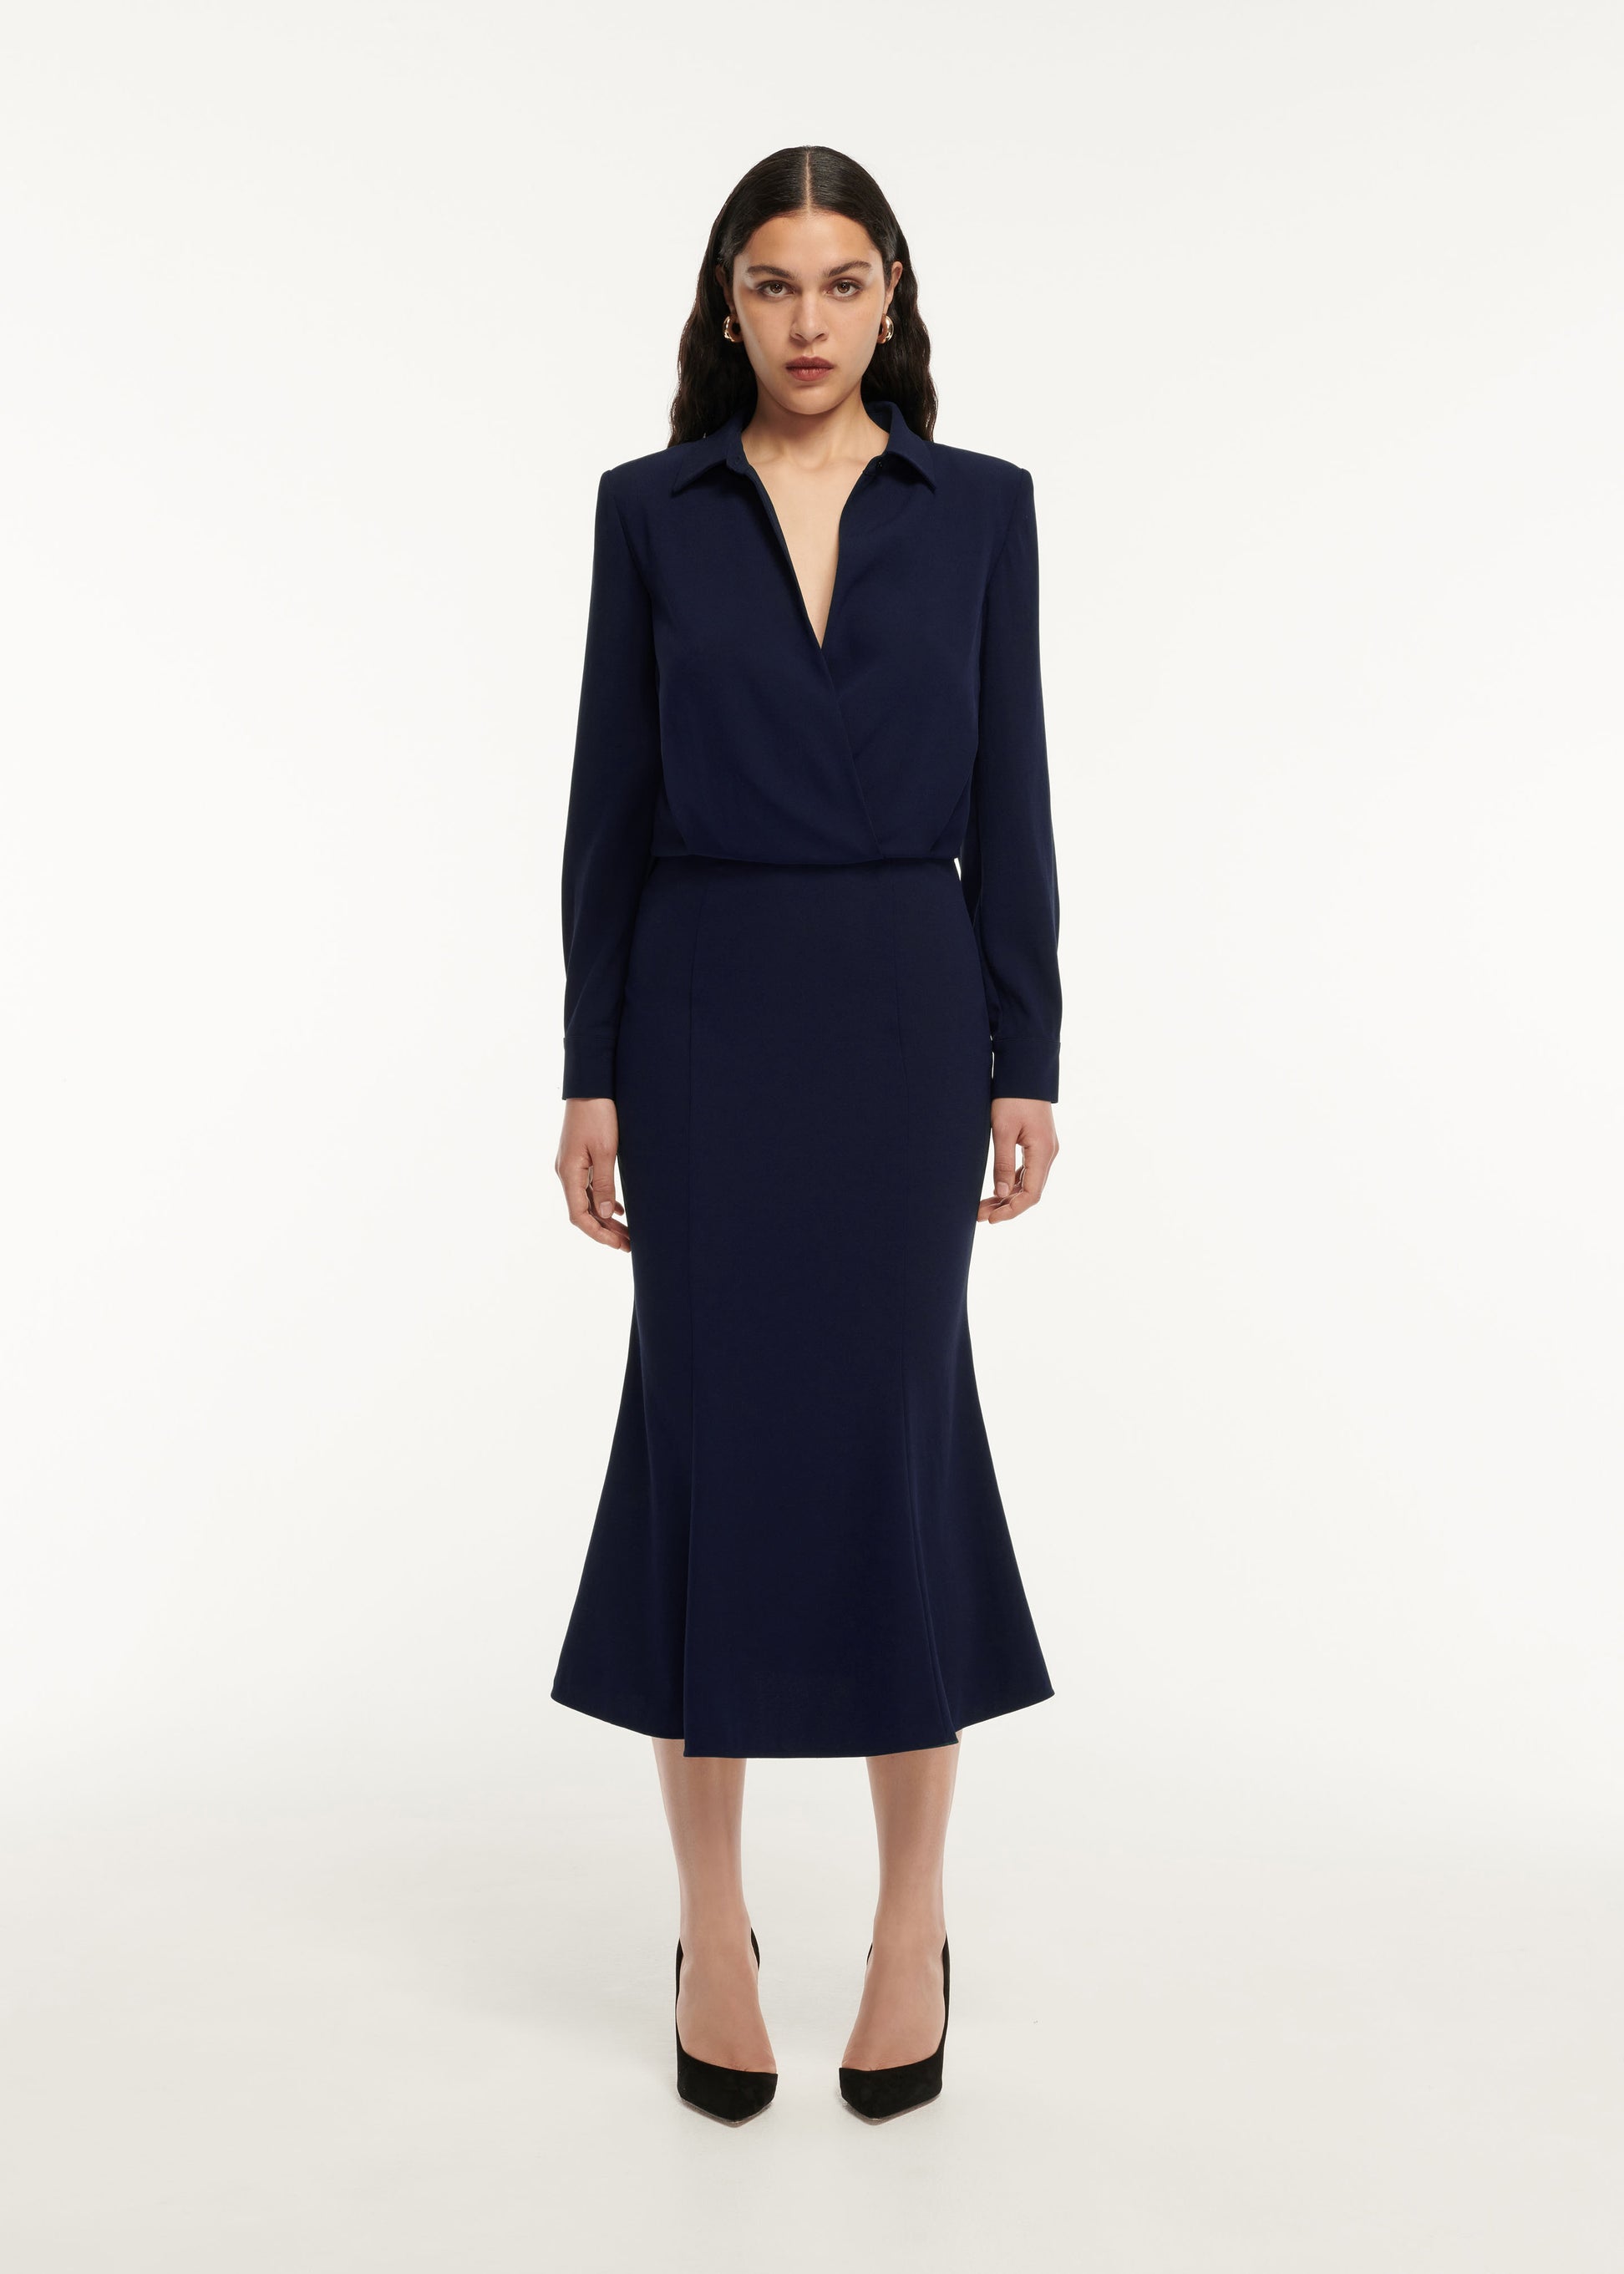 A woman wearing the Long Sleeve Collar Satin Crepe Midi Dress in Navy